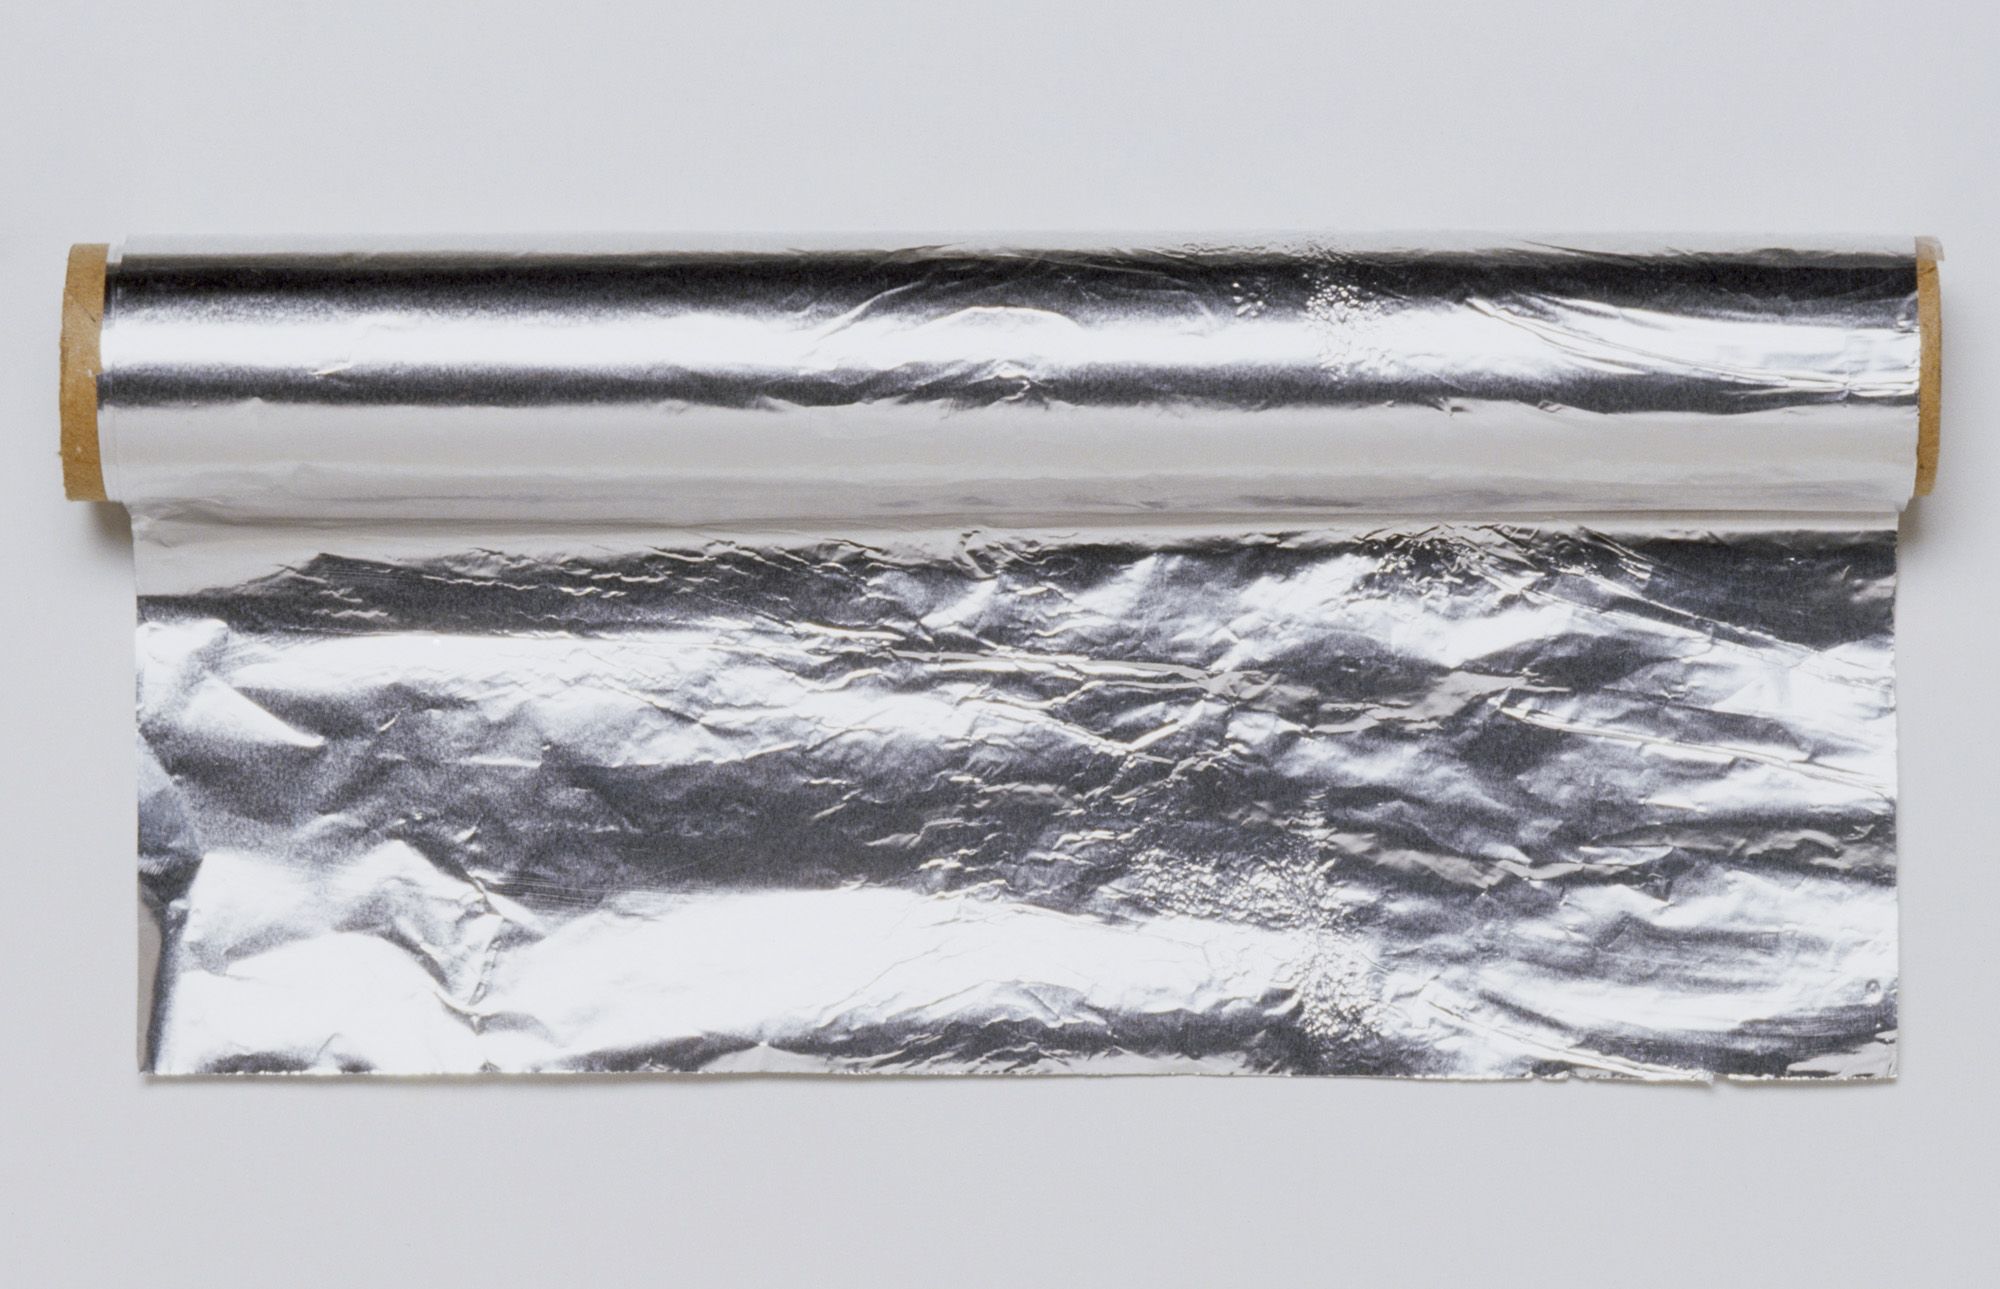 The Tiny Change That Just Made Our Favorite Aluminum Foil Even Better